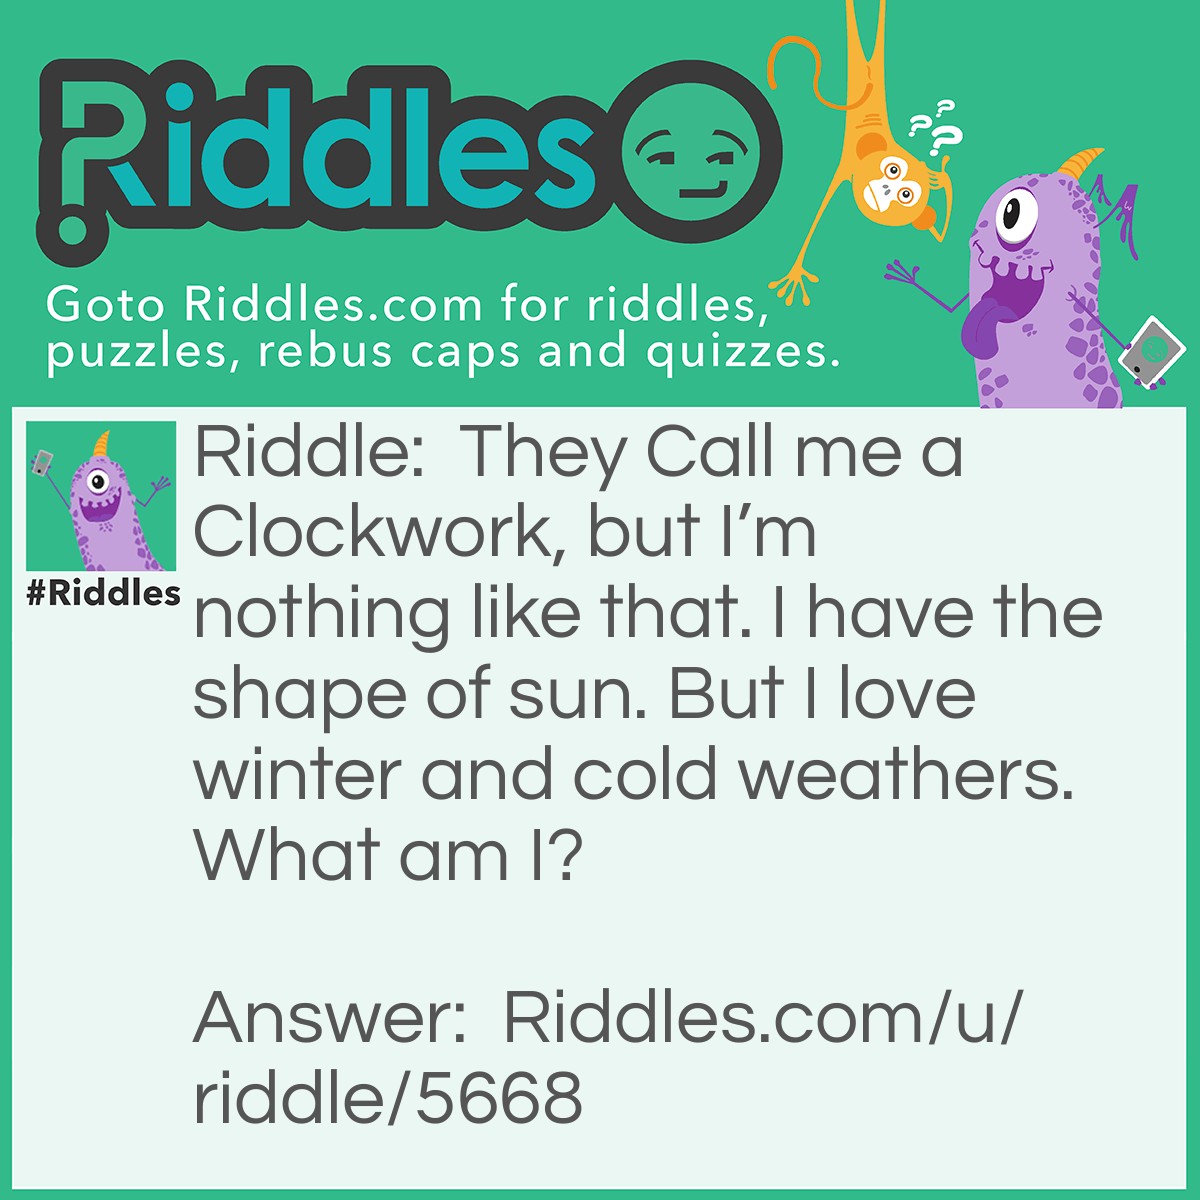 Riddle: They Call me a Clockwork, but I'm nothing like that. I have the shape of sun. But I love winter and cold weathers. What am I? Answer: Orange.